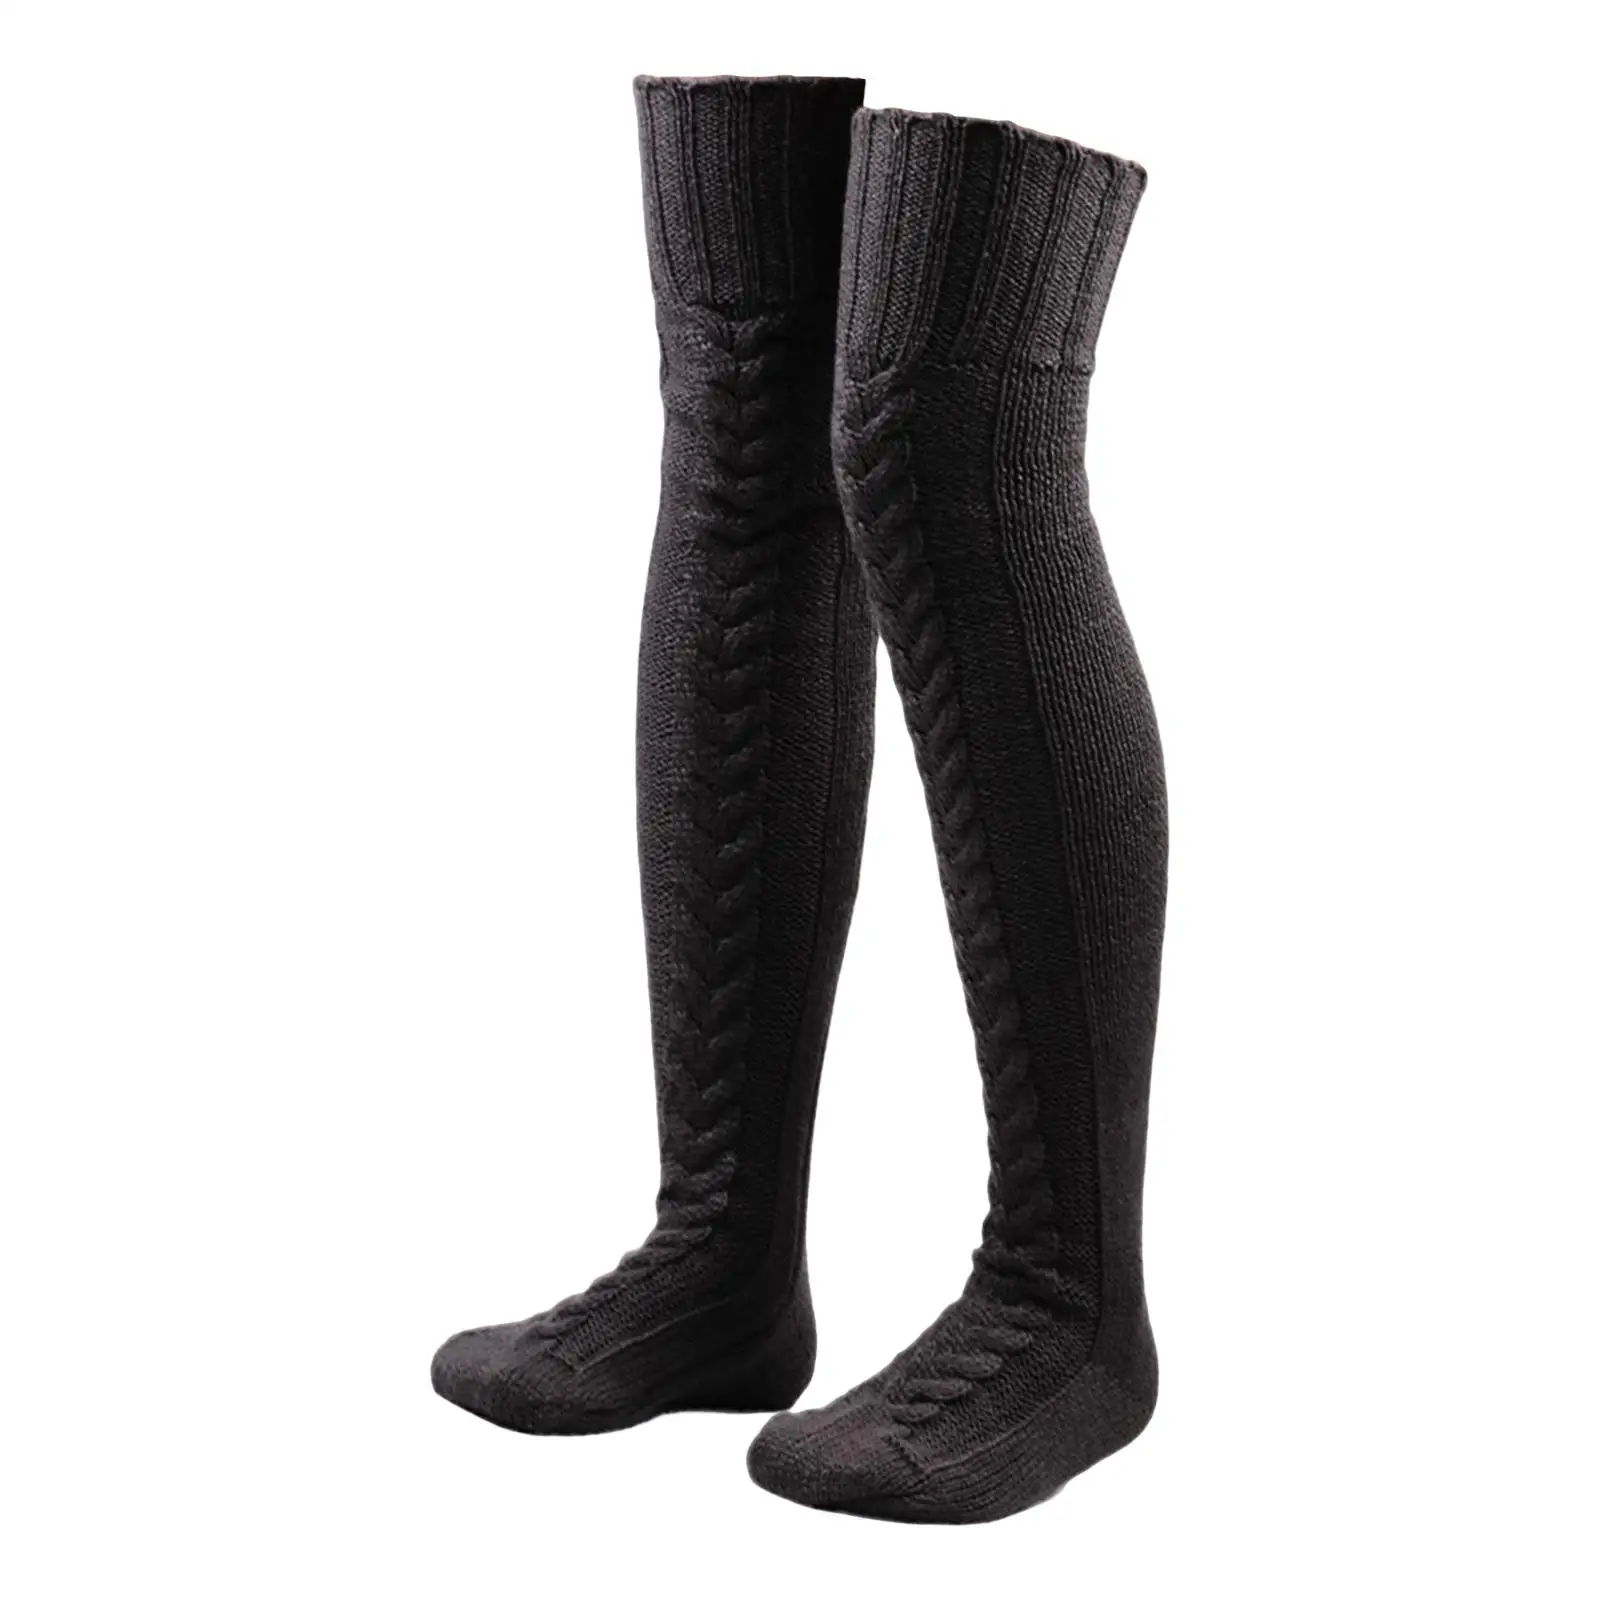 Cable Knitted Thigh High Socks Legging Stocking Birthday Gift, Cosplay